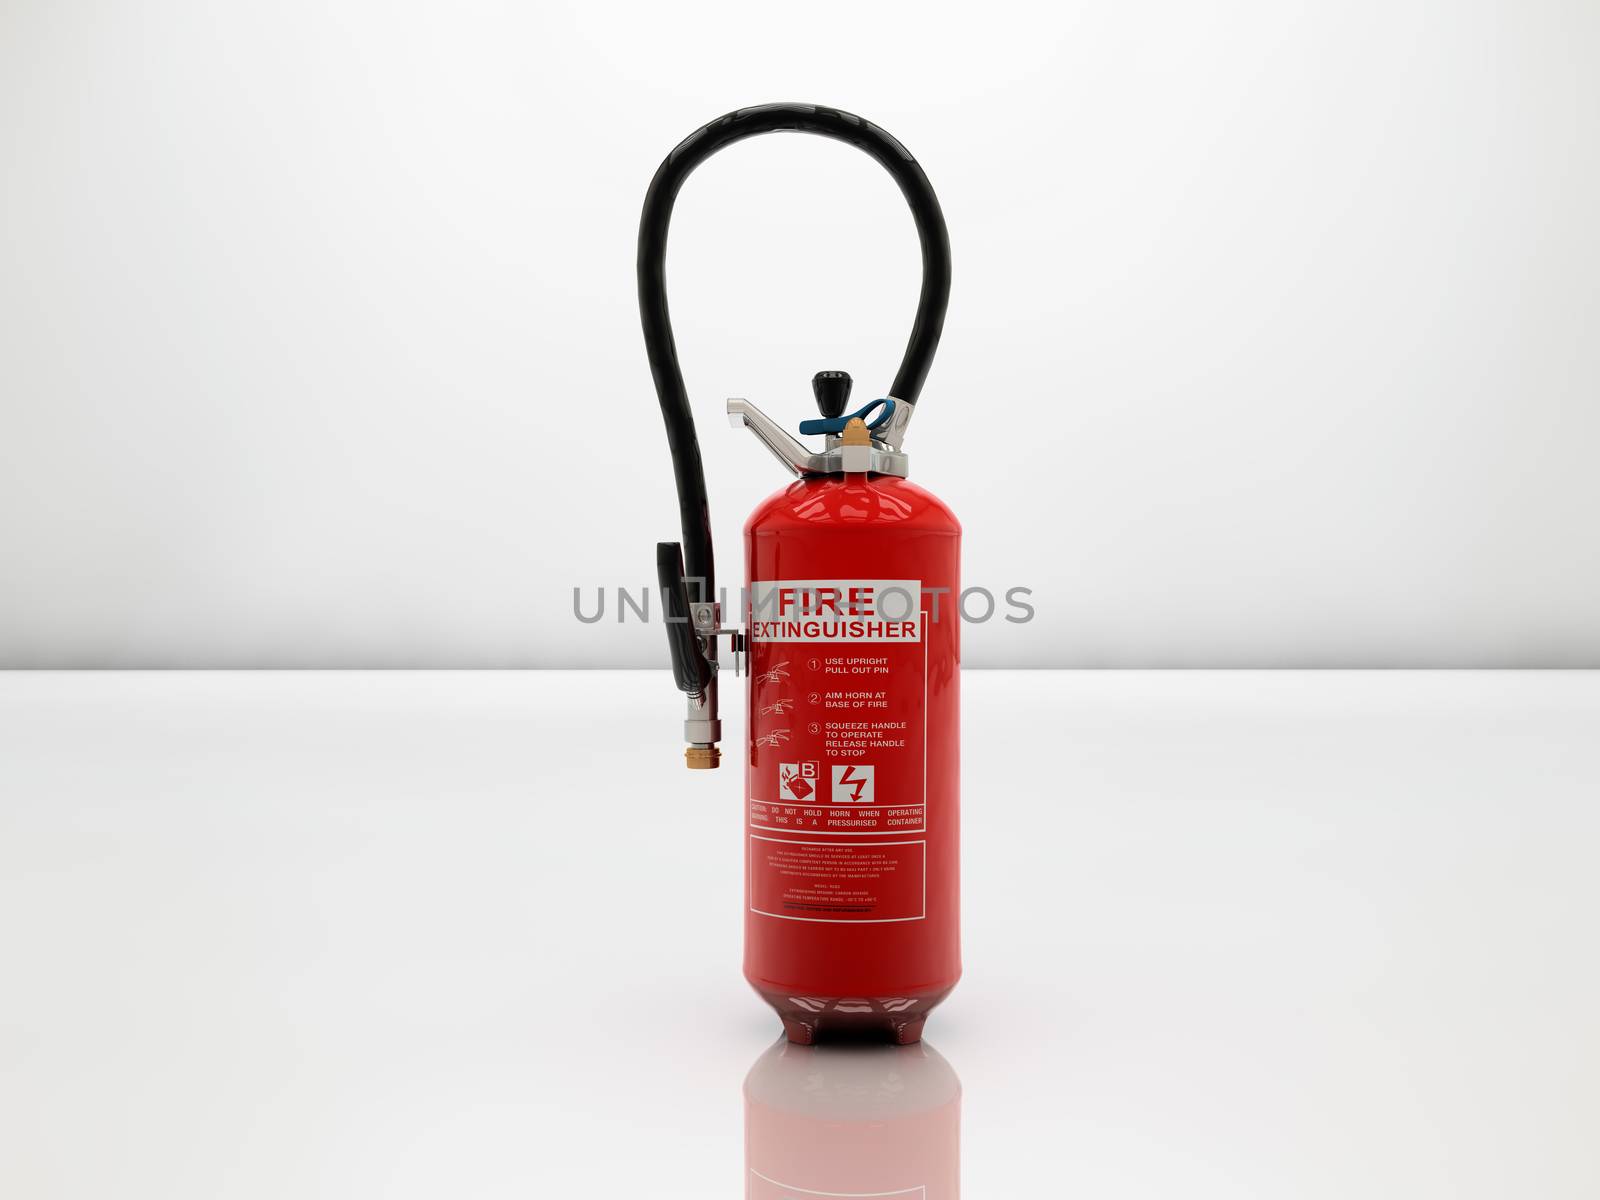 Extinguisher on white and glossy surface